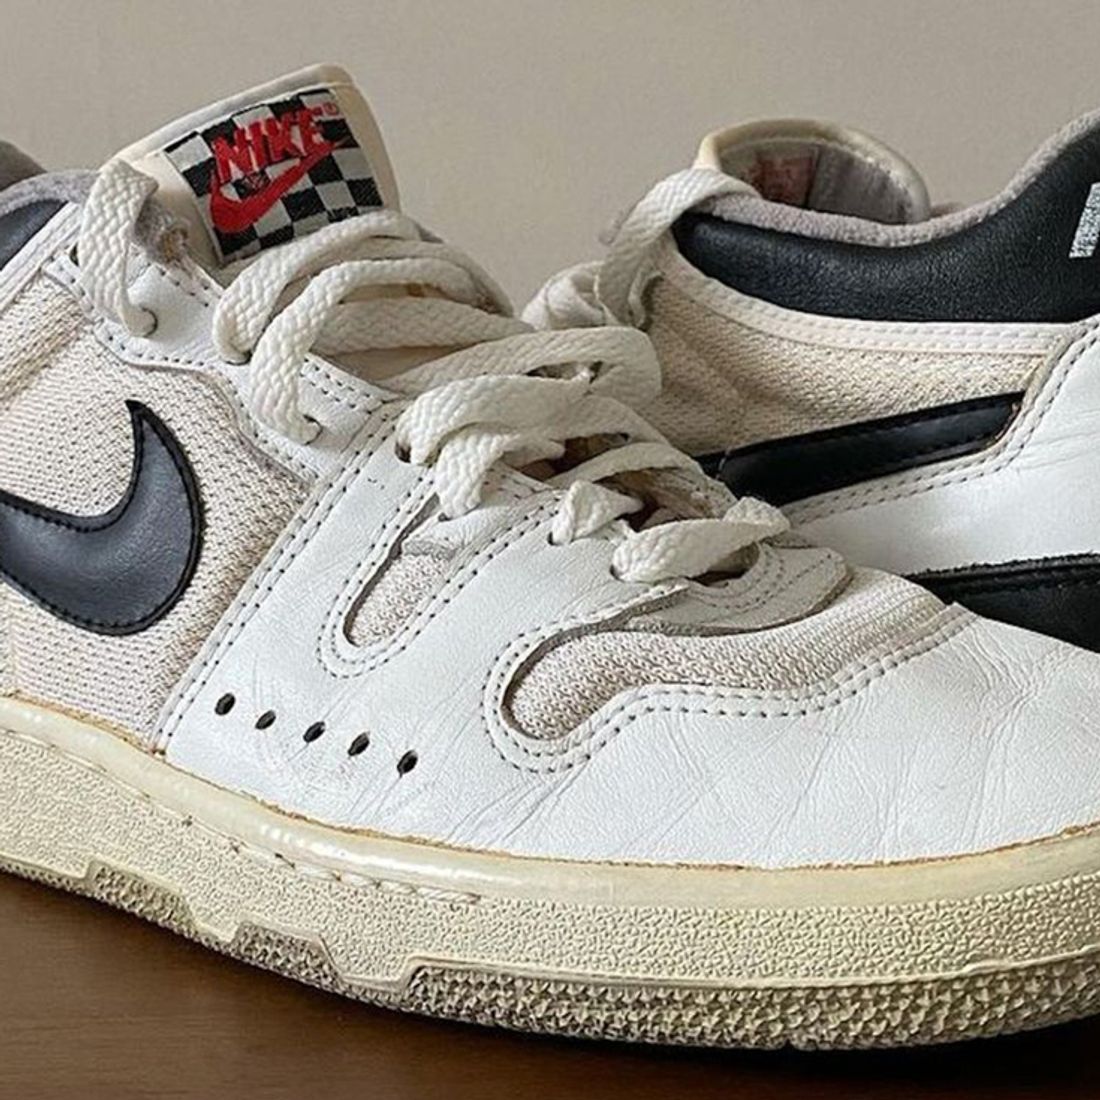 Rumour: The Nike Mac Attack Is to Come Back! - Sneaker Freaker